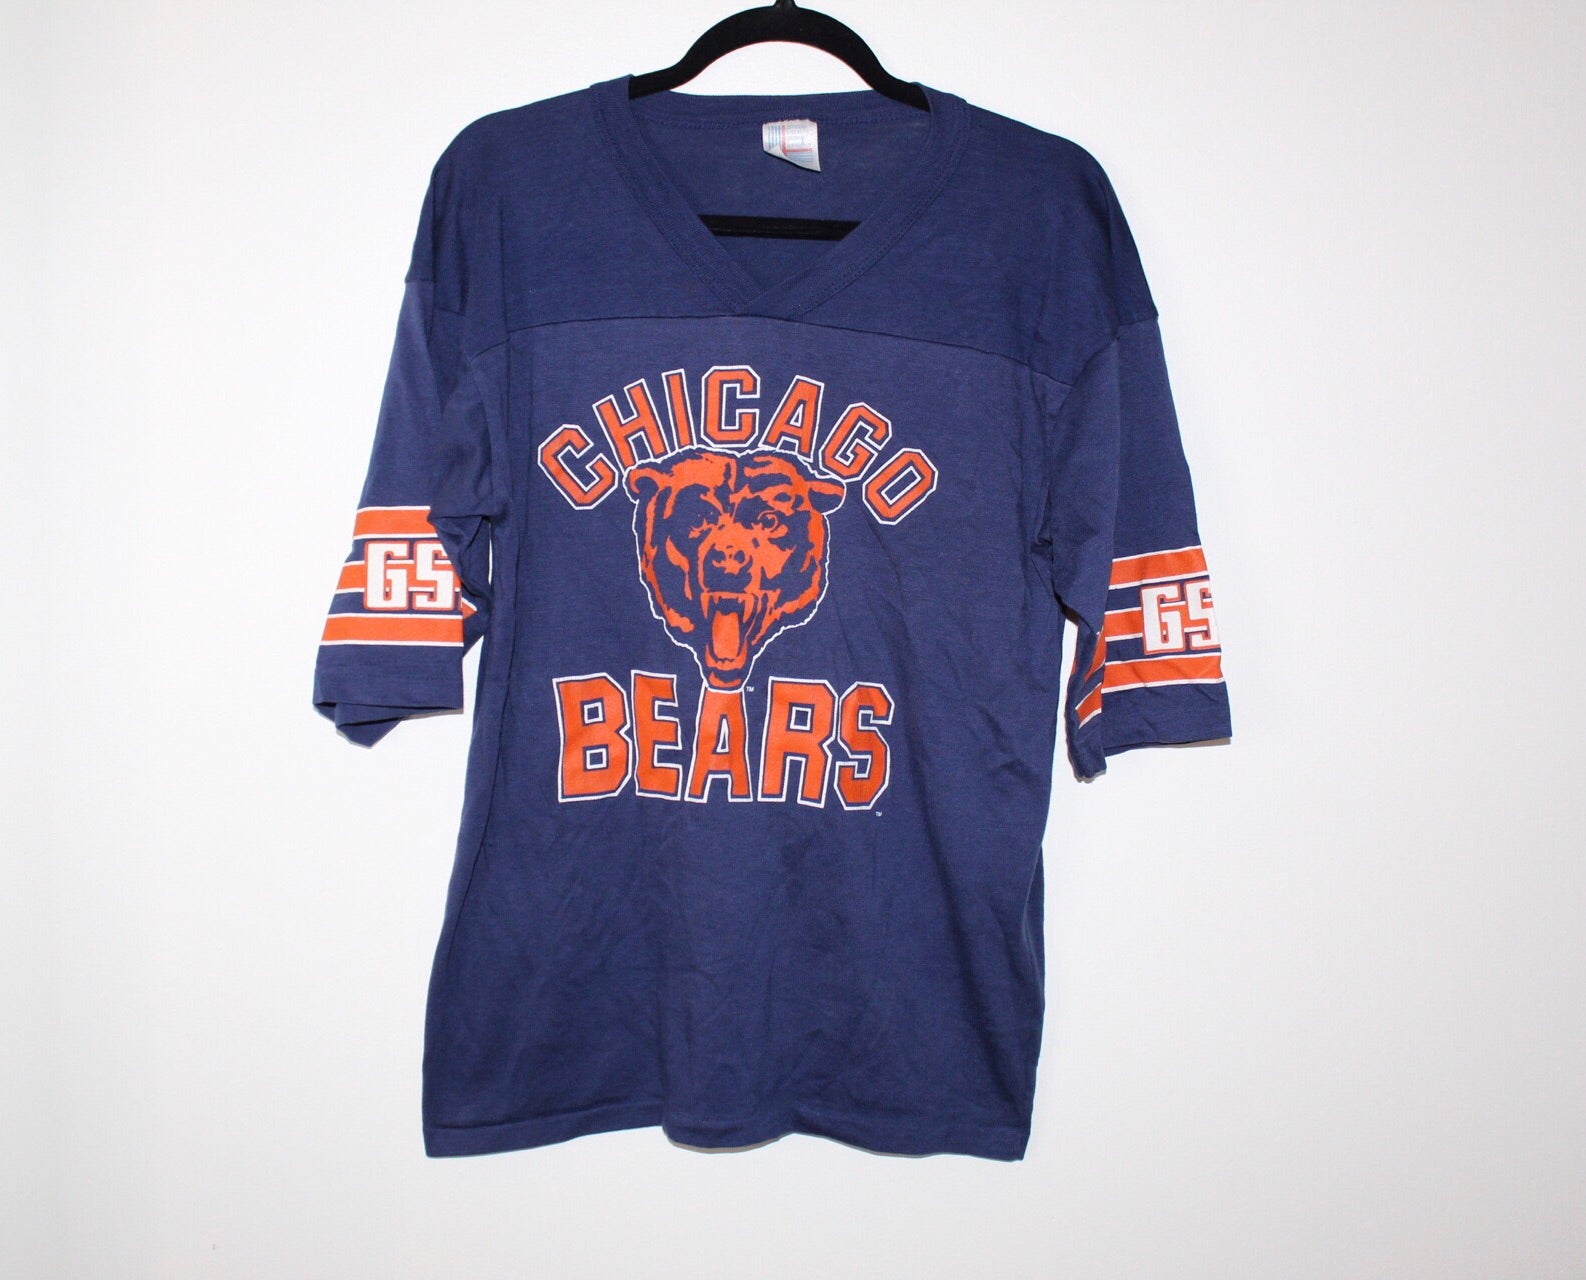 Chicago Bears Vintage Jersey T-Shirt 